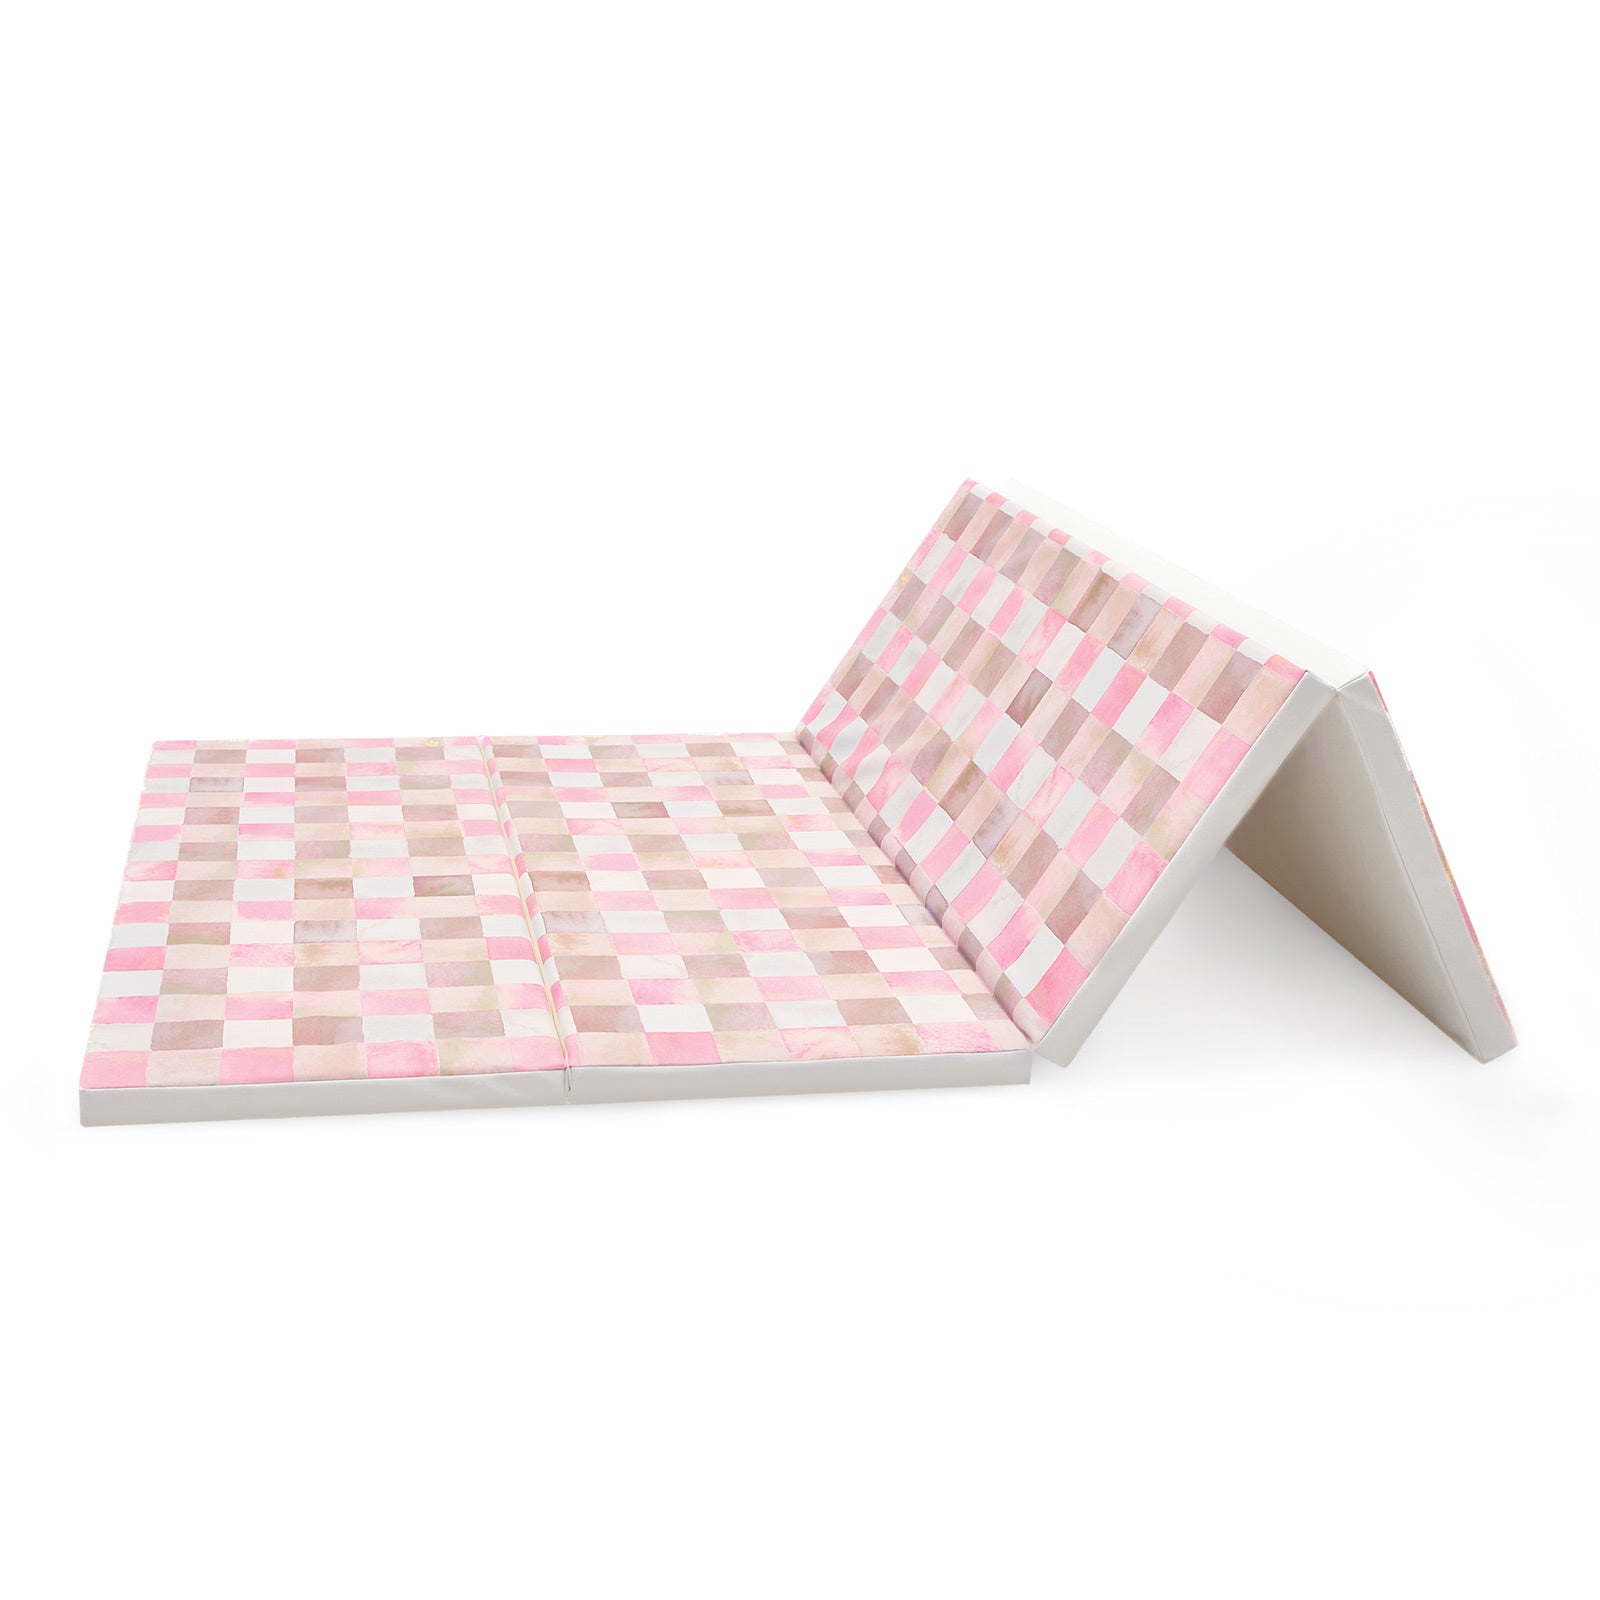 Gingham Neapolitan pink and brown checker print tumbling mat shown with 2 panels folded in a propped up standing position 